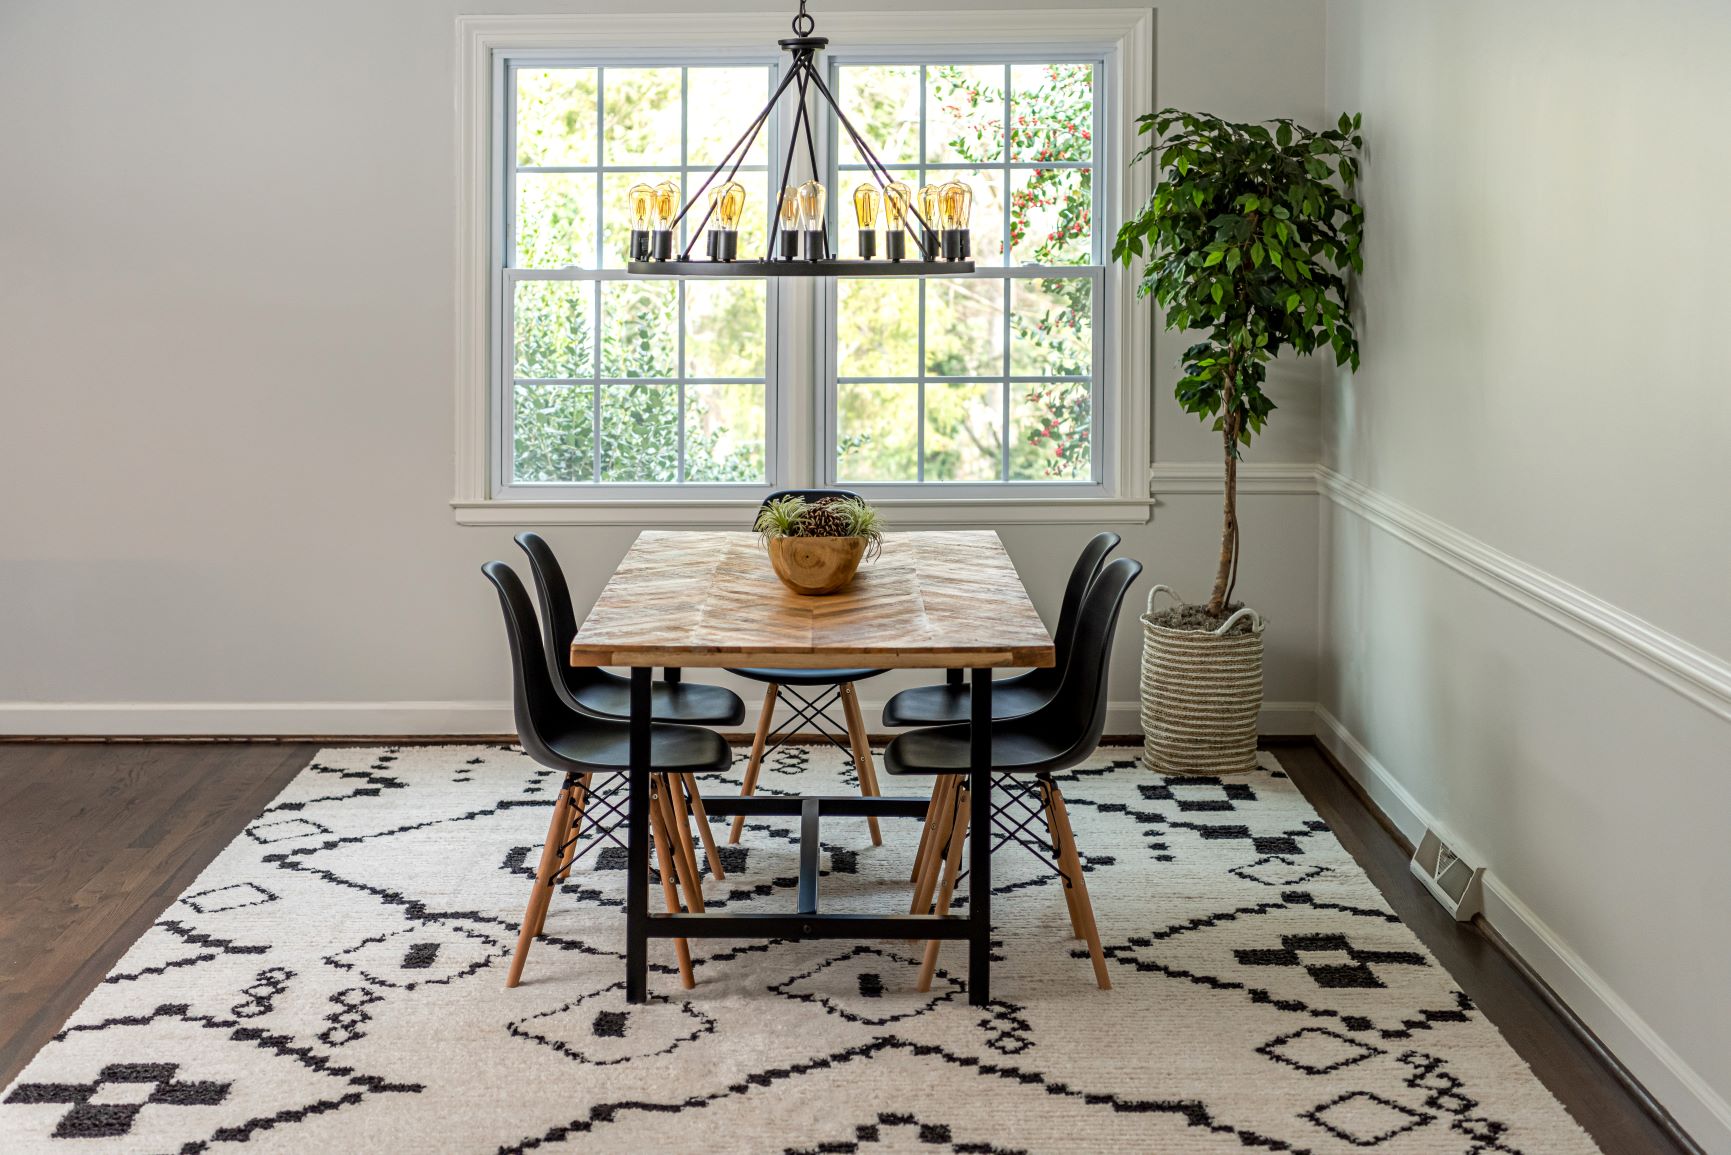 What Kind Of Rug Looks Best Under A Country-Style Table